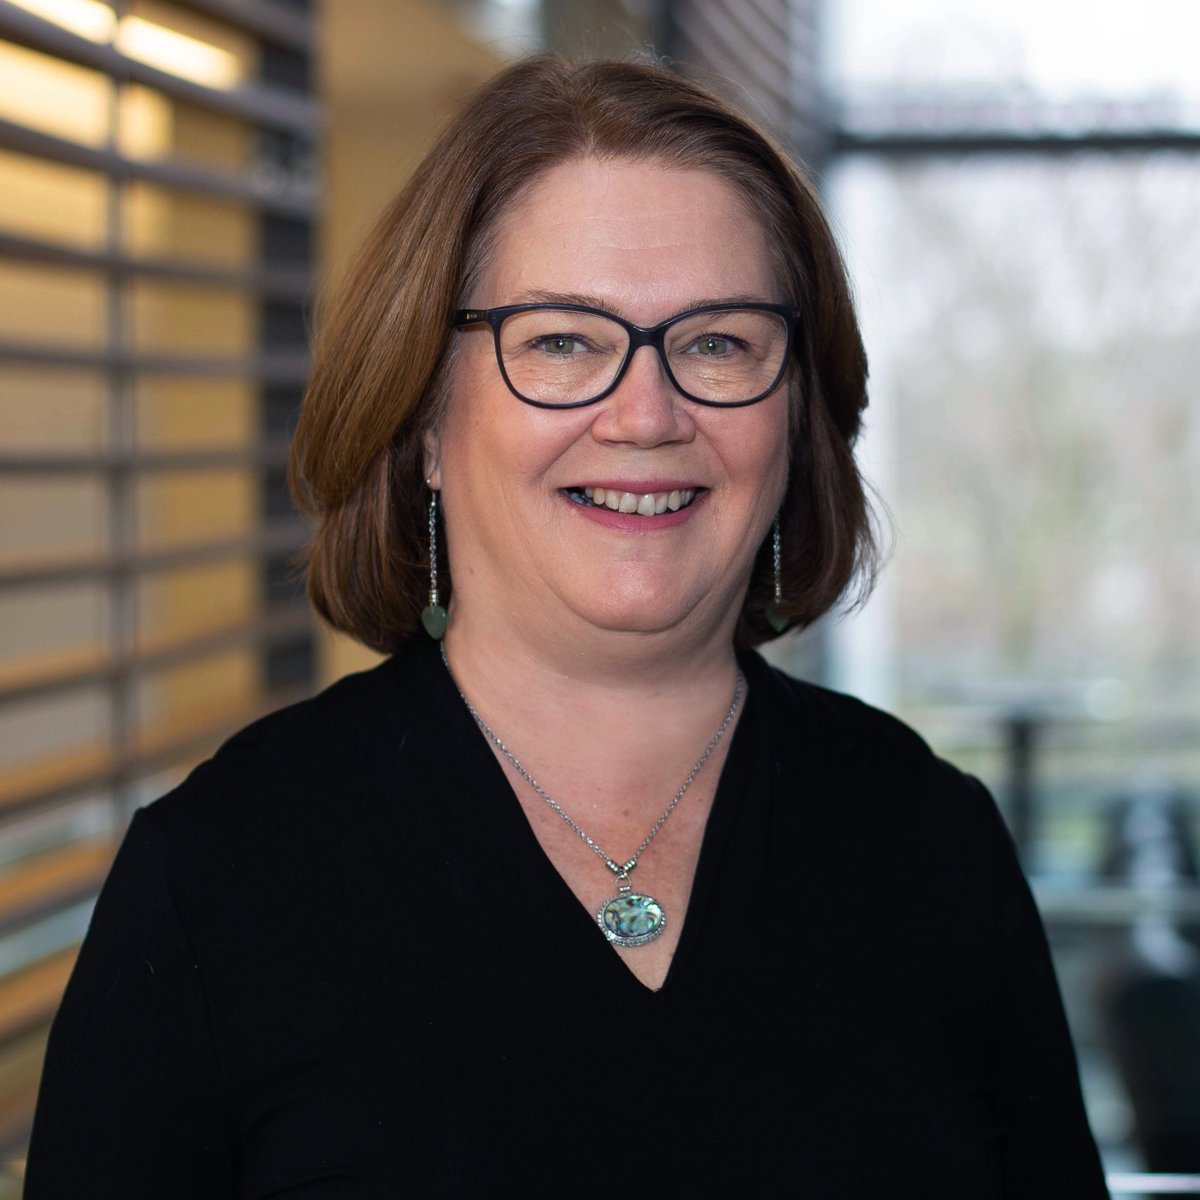 SEAMO CEO Dr. @janephilpott speaks to the @WhigStandard on the success of our #strategicplan thus far, how we're continuing to support education, research and clinical work in the Southeast region and how SEAMO is a health systems leader. Read more: seamo.ca/whats-new/news…